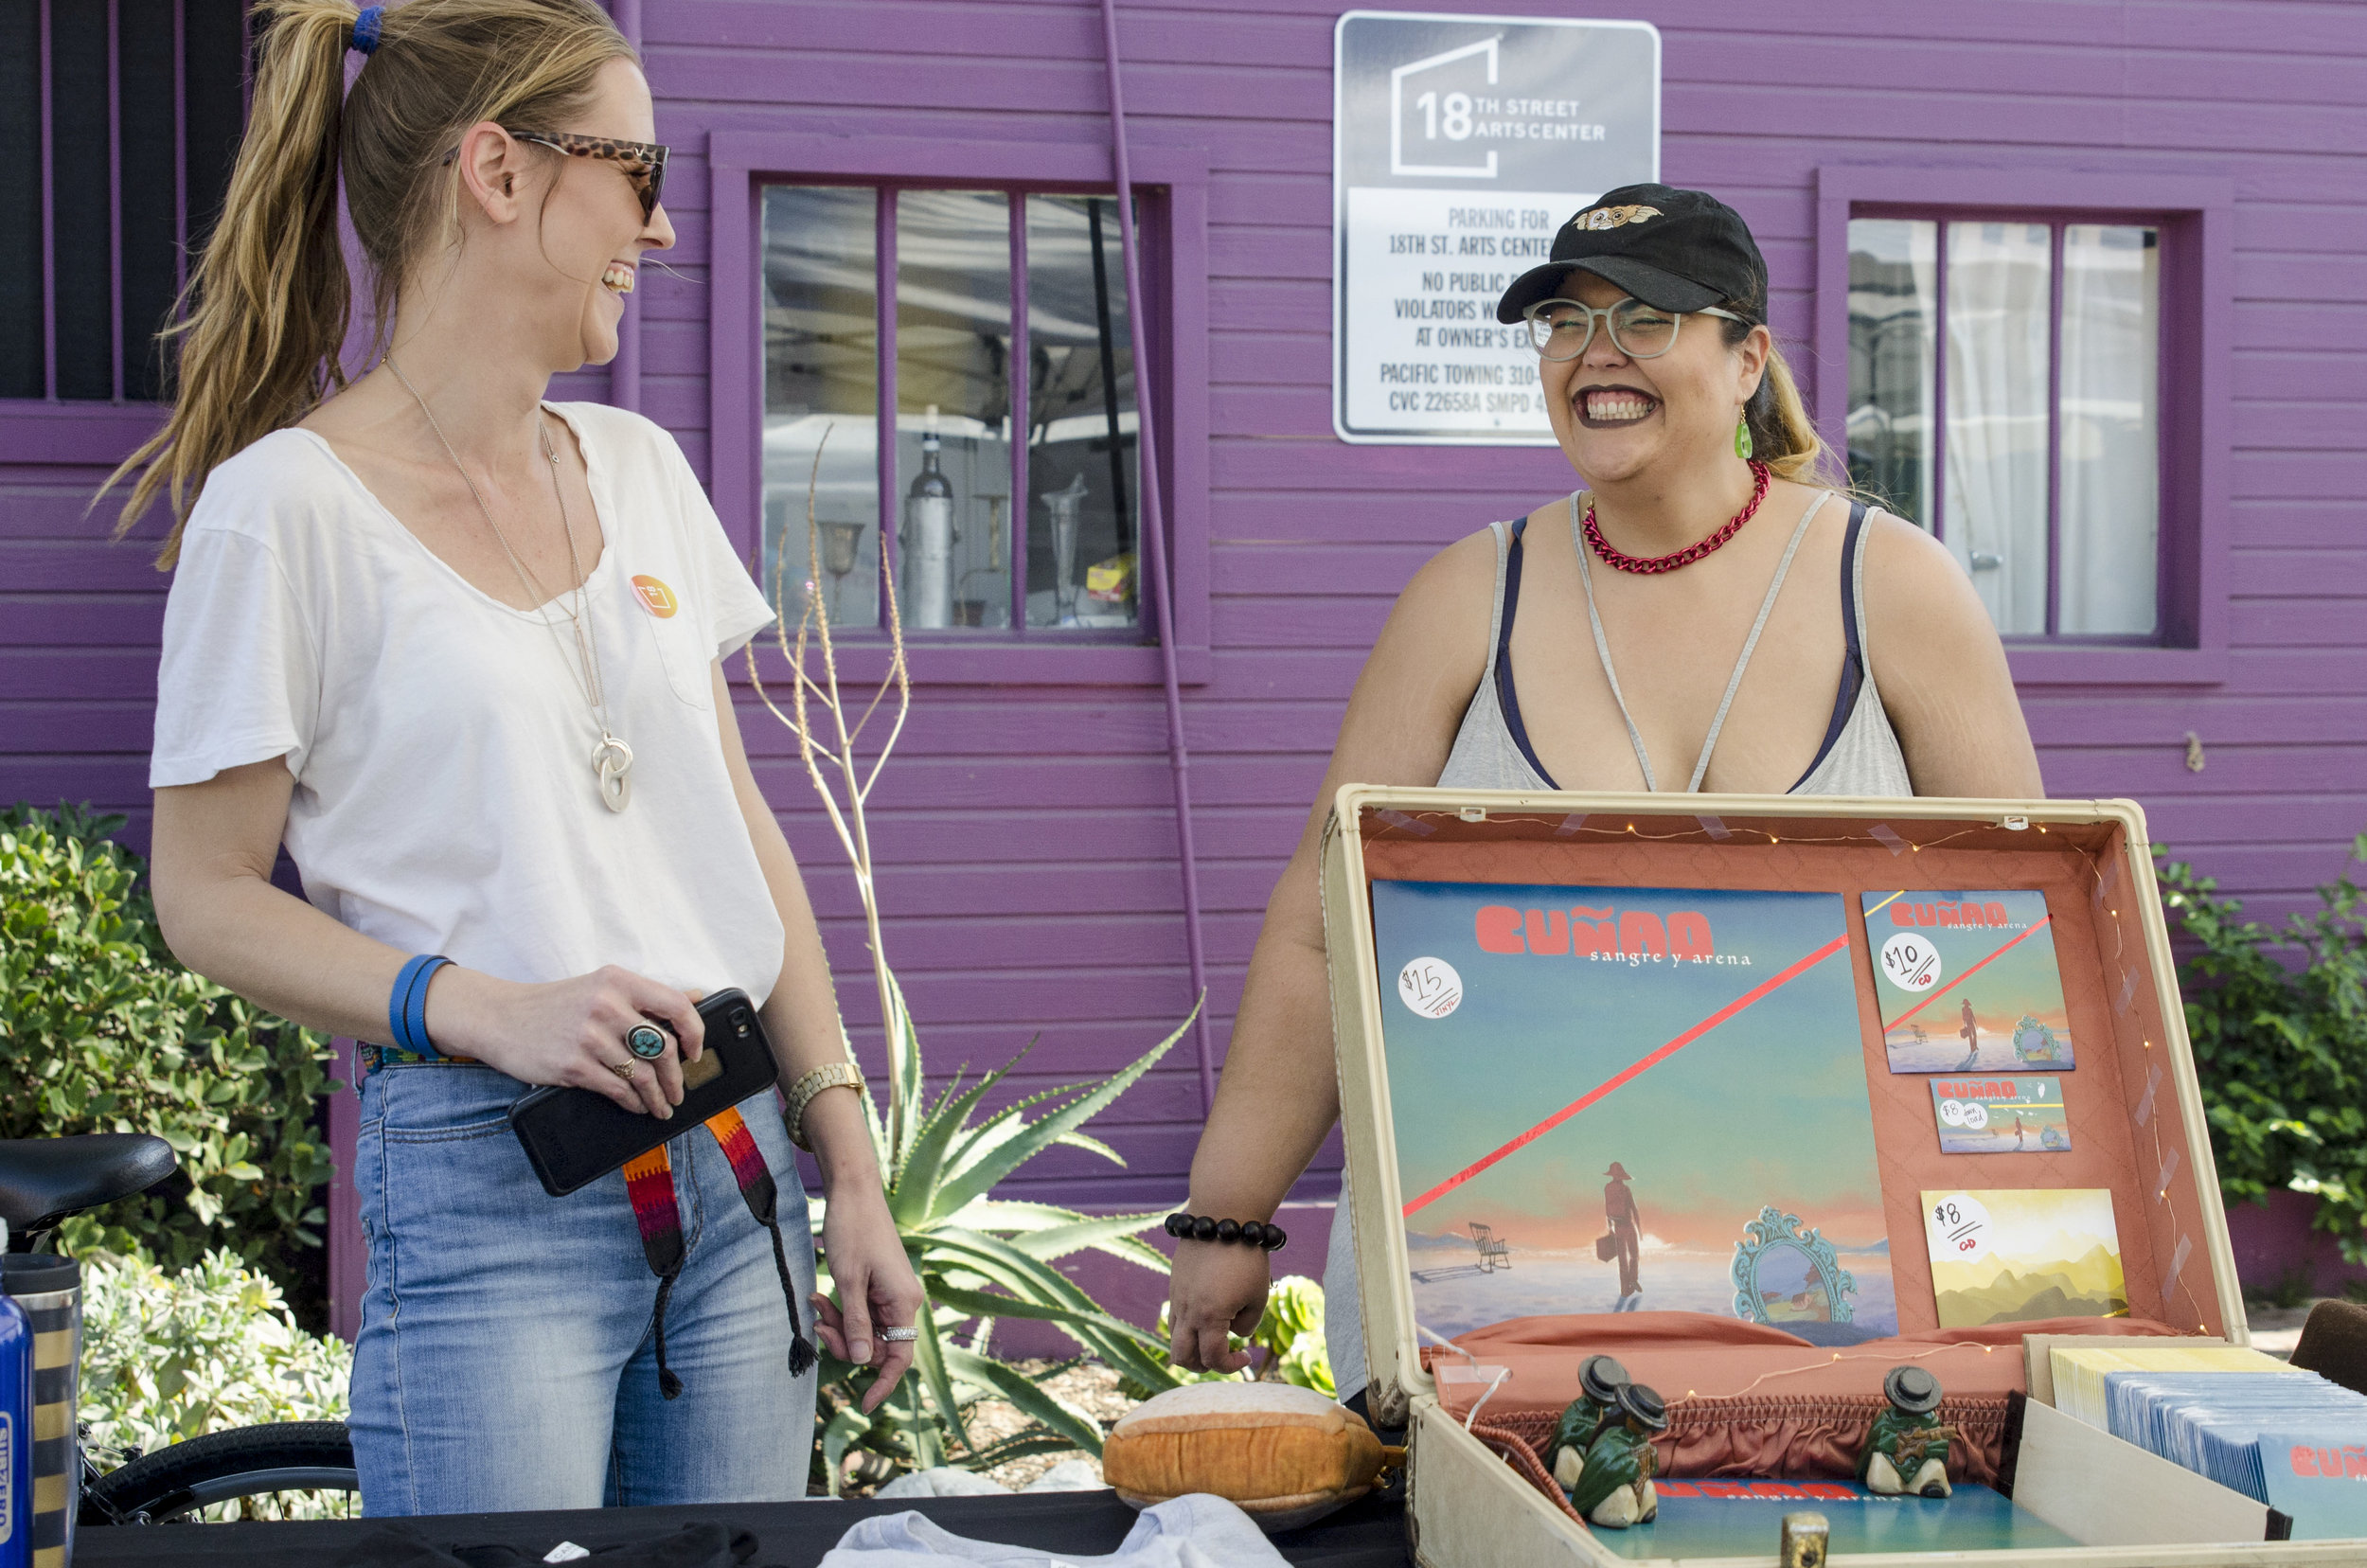  Sarah Sin(left) and Walleska Barreto(right) enjoying and dancing to the music of the band Cuñao at the Pico Block Party.18th Street Art Center on 18th and Olympic. Santa Monica, Calif. on October 14, 2017. (Photo by Diana Parra Garcia) 